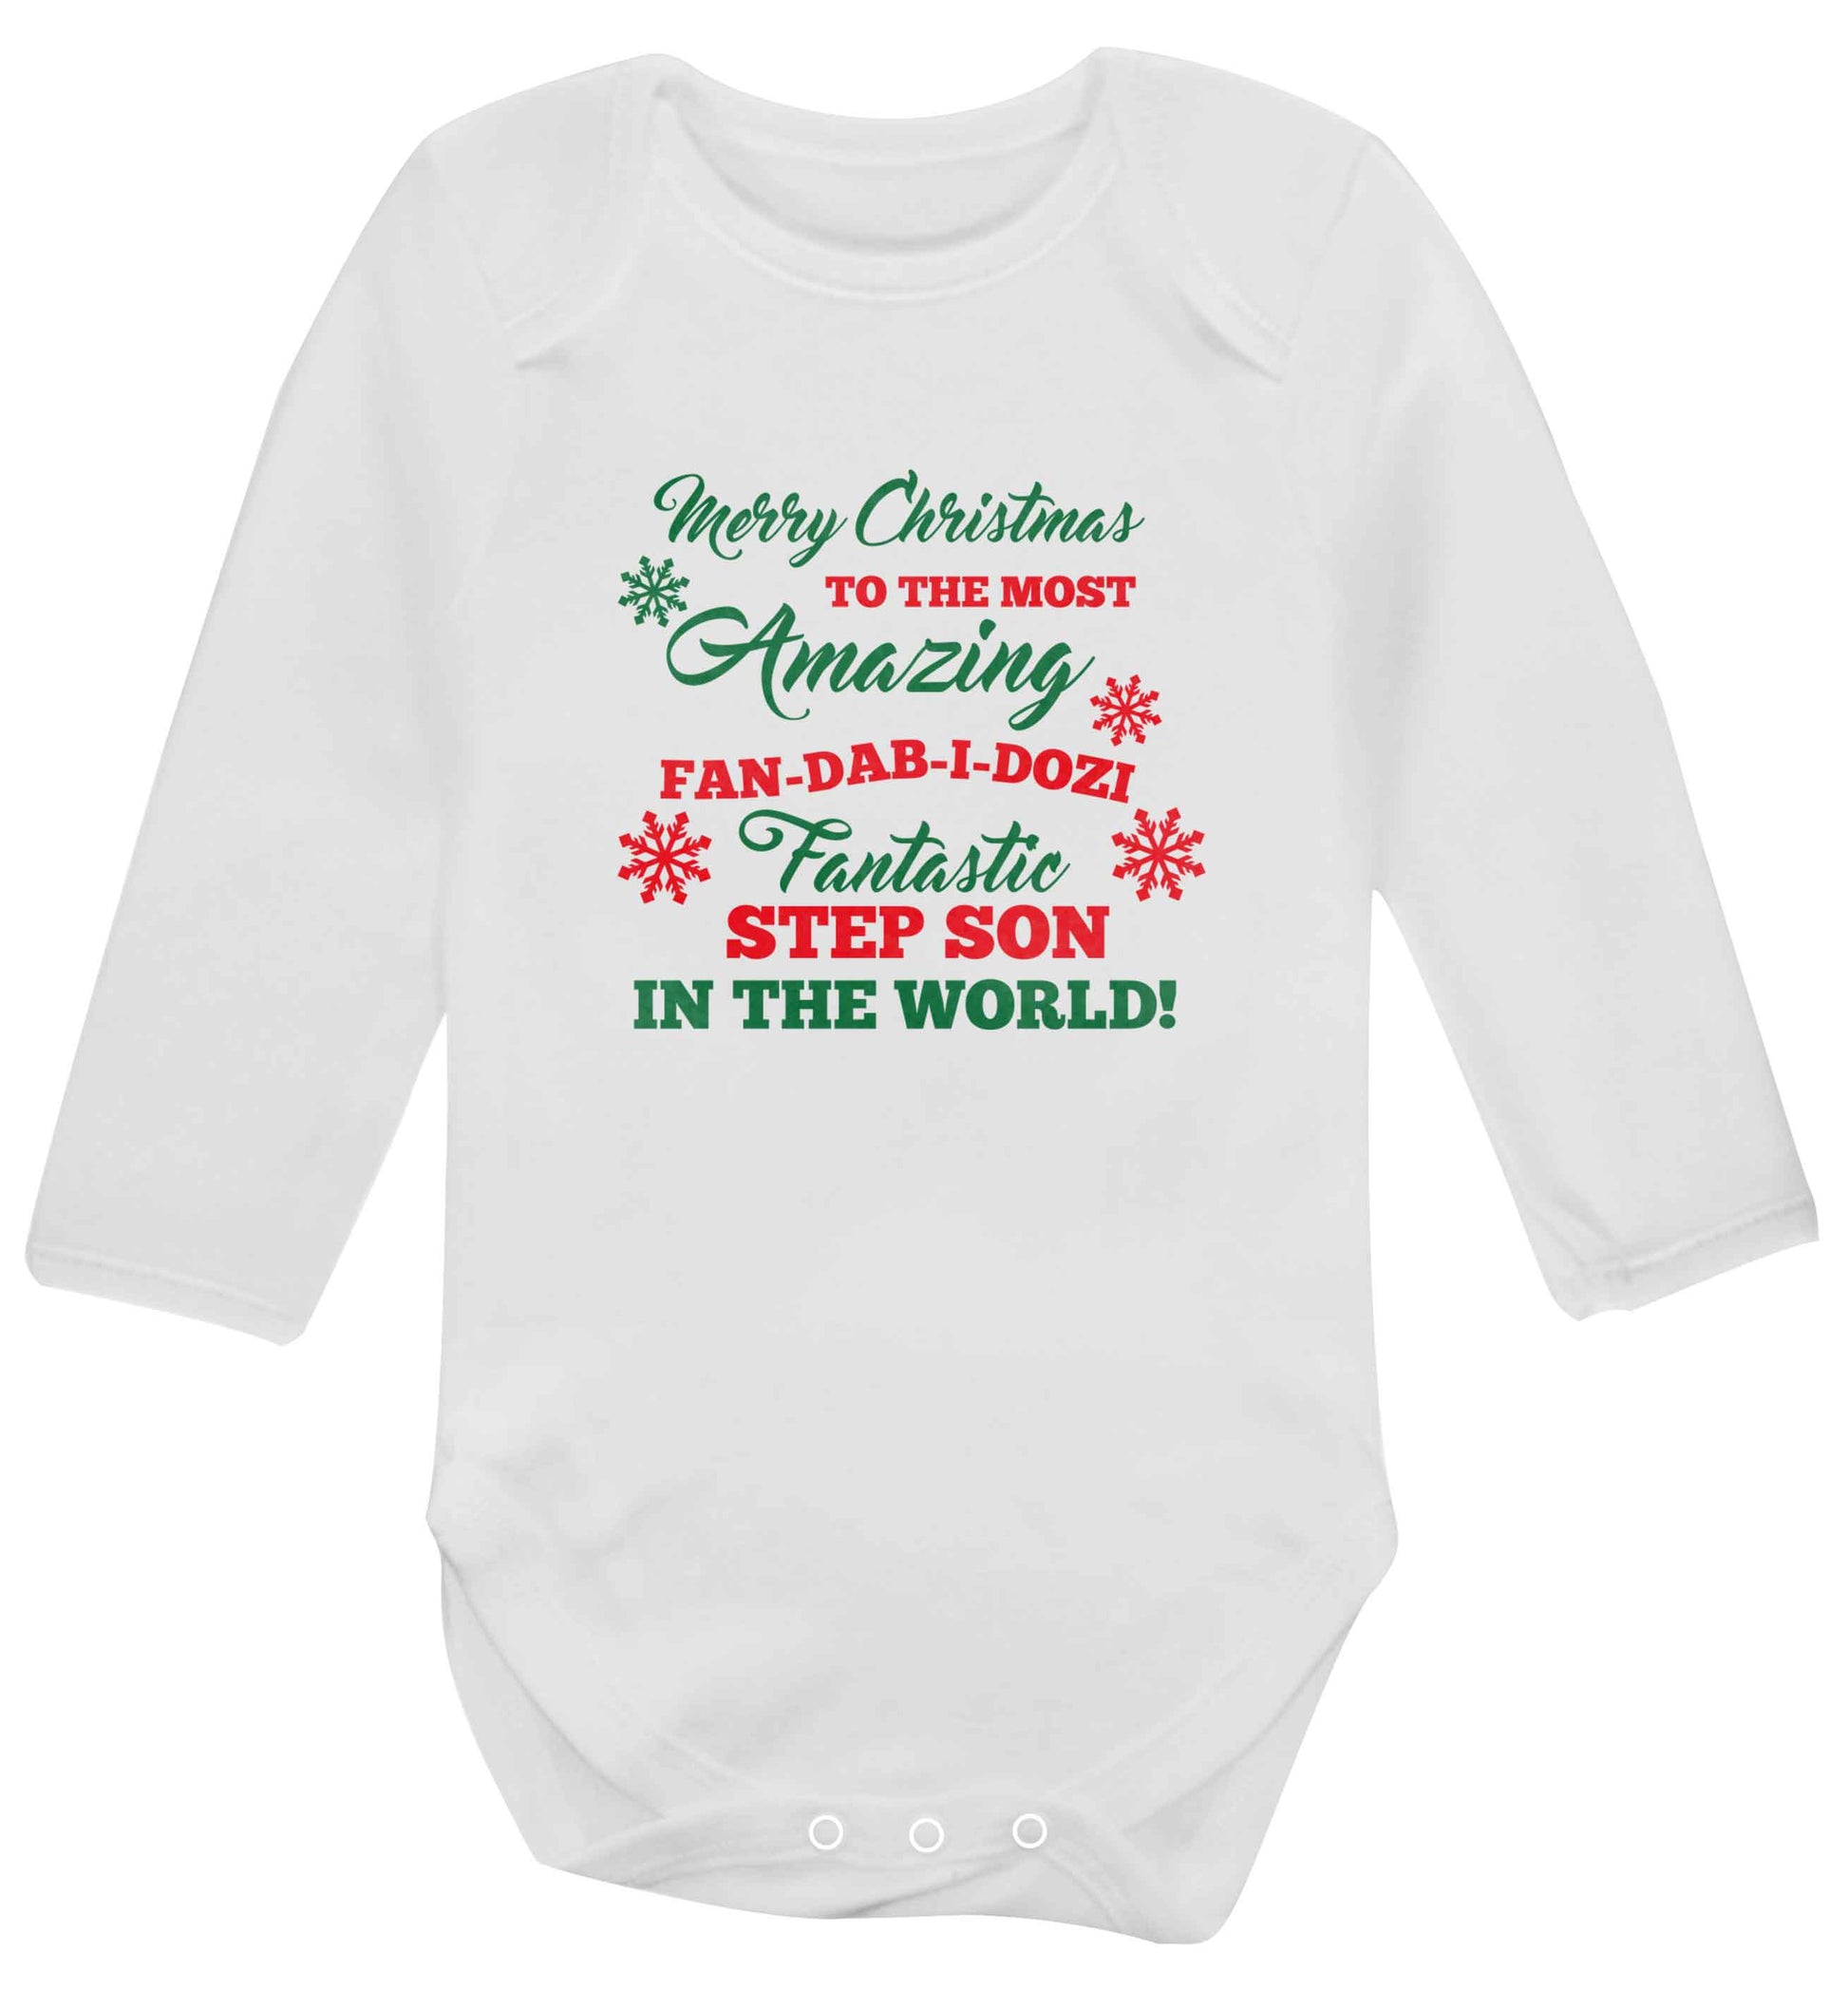 Merry Christmas to the most amazing fan-dab-i-dozi fantasic Step Son in the world baby vest long sleeved white 6-12 months